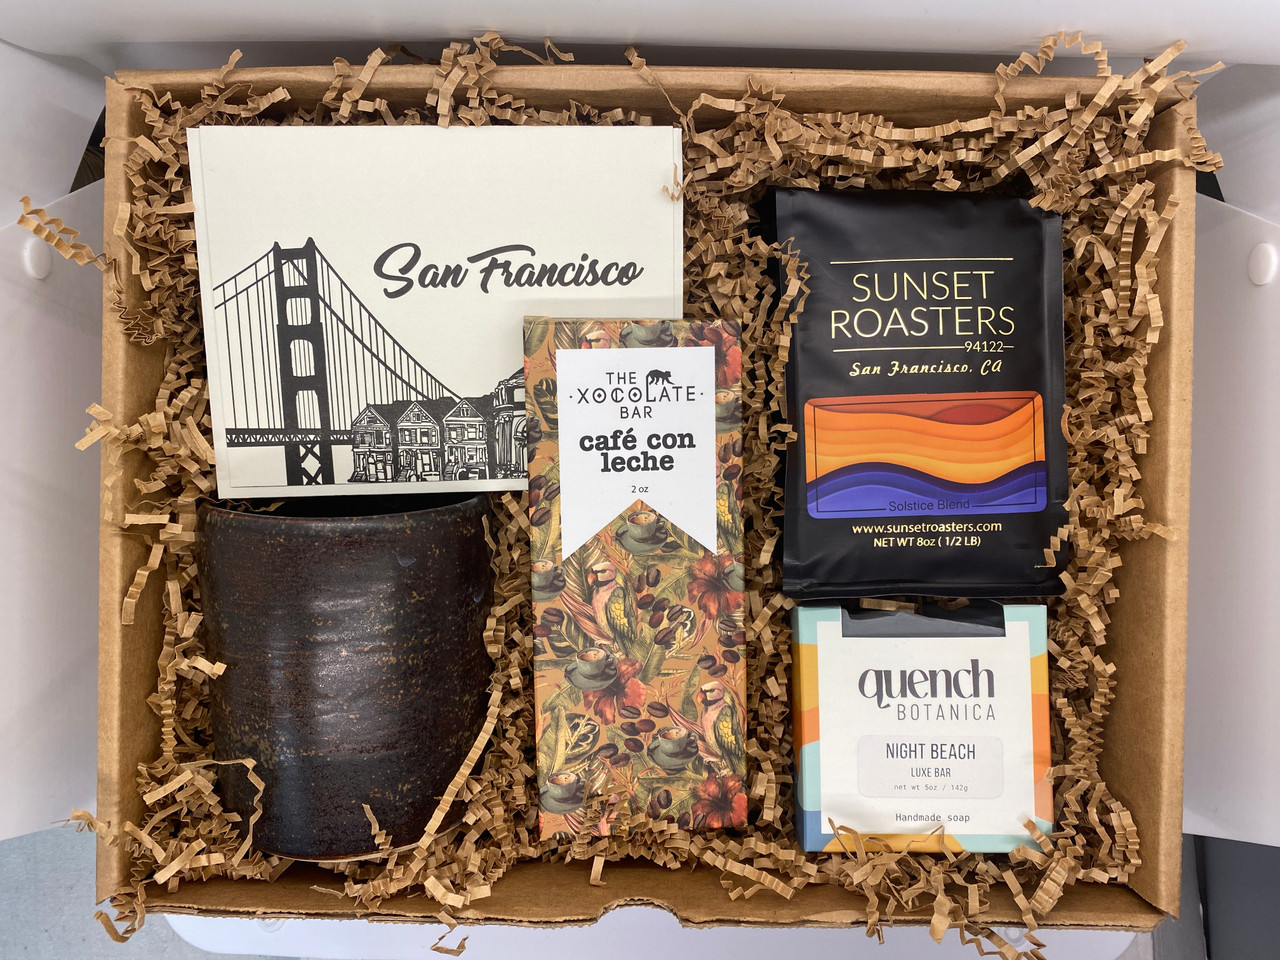 Coffee Lover - Book Lover Gift Box